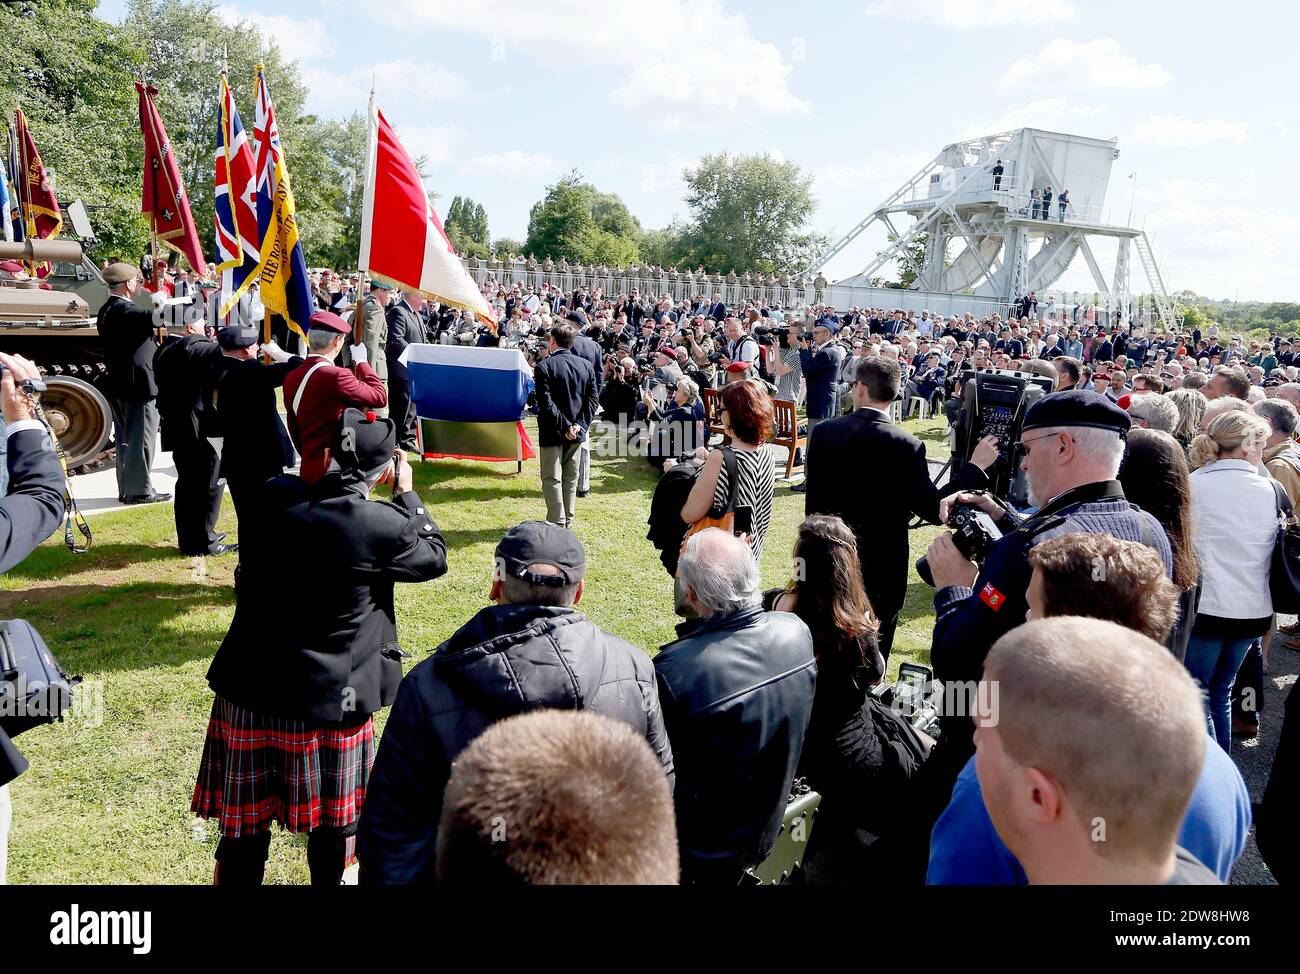 Atmosphere at Pegasus Bridge to lay a wreath at the Glider Pilot Memorial in Benouville as part of the official ceremonies on the occasion of the D-Day 70th Anniversary, on June 5, 2014 in Normandy, France. Photo by Patrick Bernard/ ABACAPRESS.COM Stock Photo